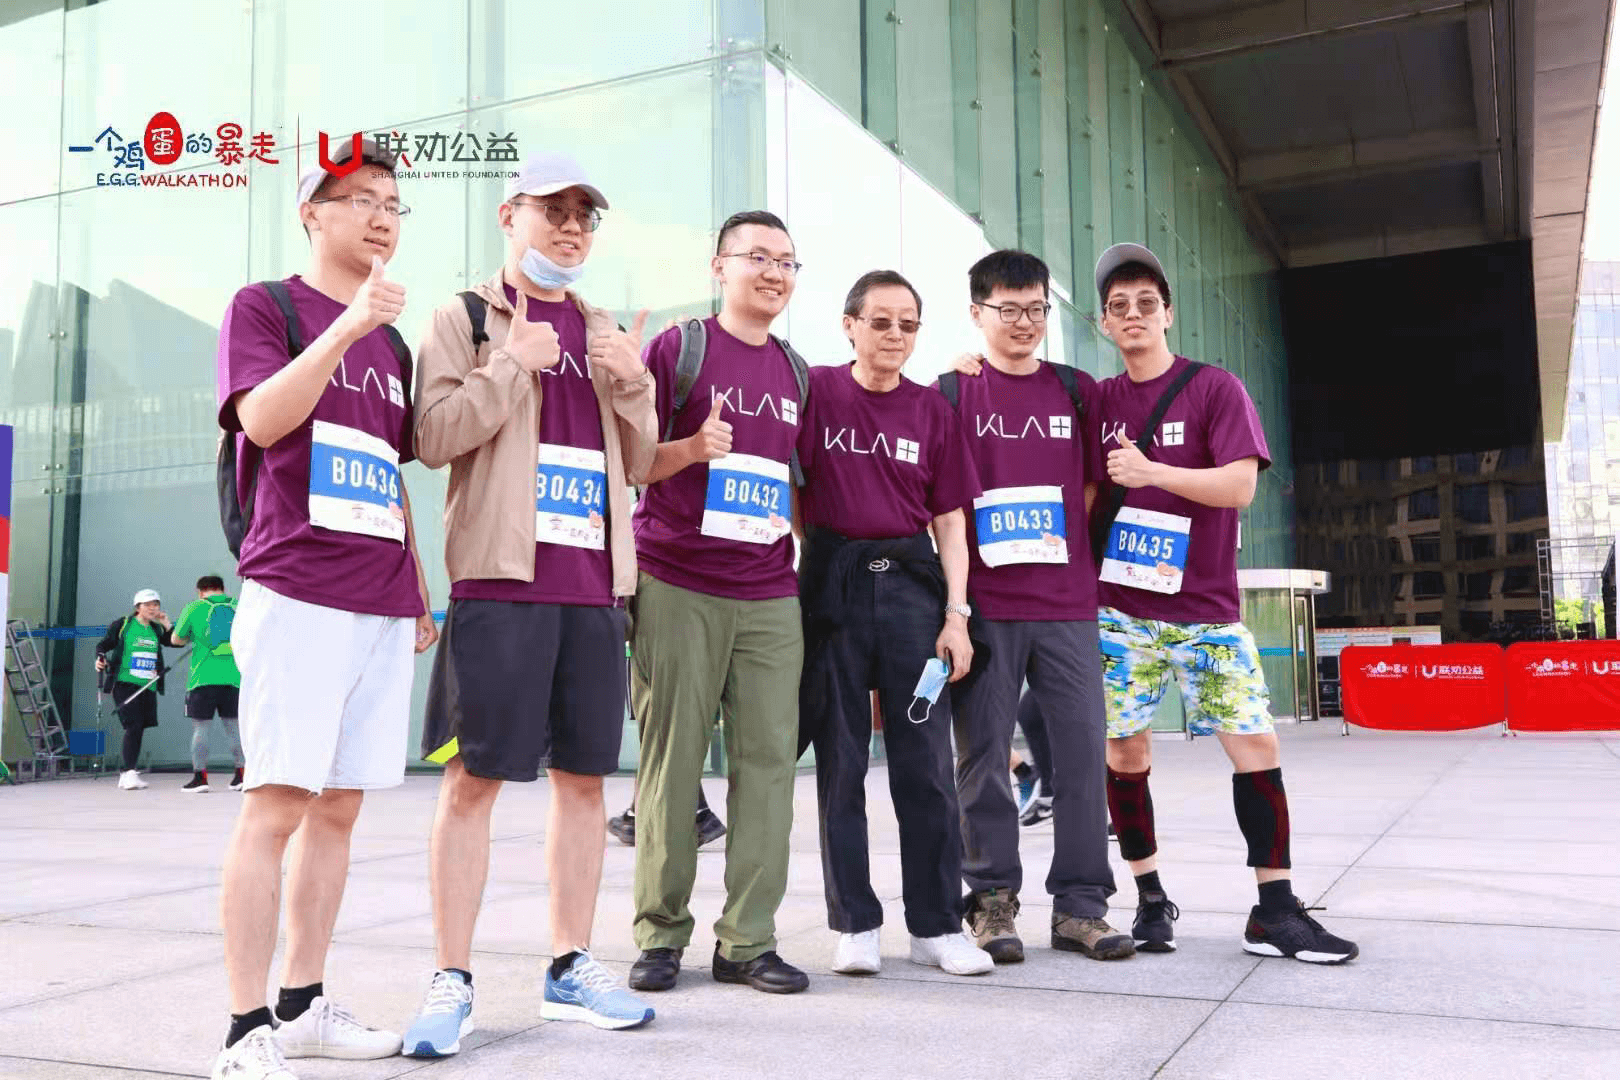 KLA employees posing for a photo during the June 2021 Walkathon event held in China.